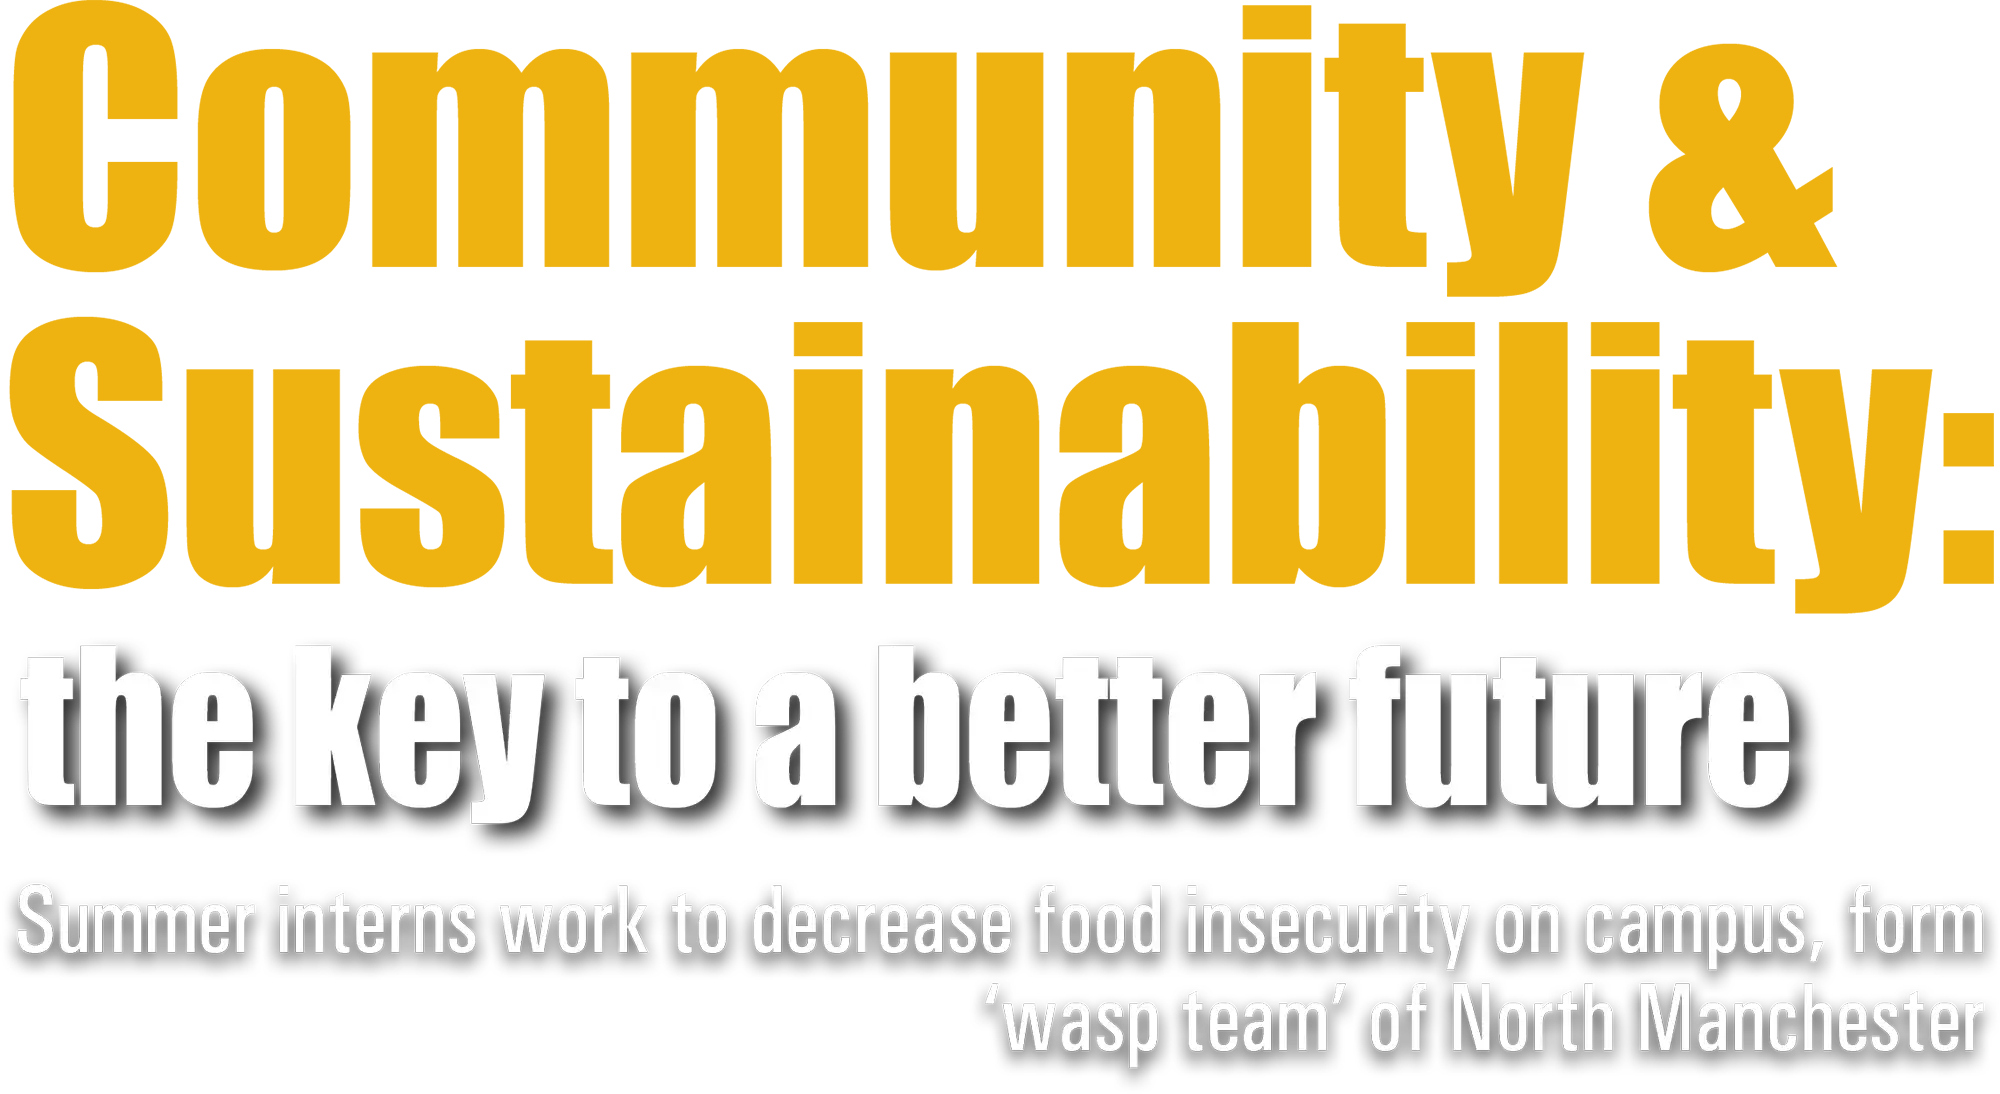 Community and Sustainability, the key to a better future, summer interns work to decrease food insecurity on campus, from wasp team of North Manchester